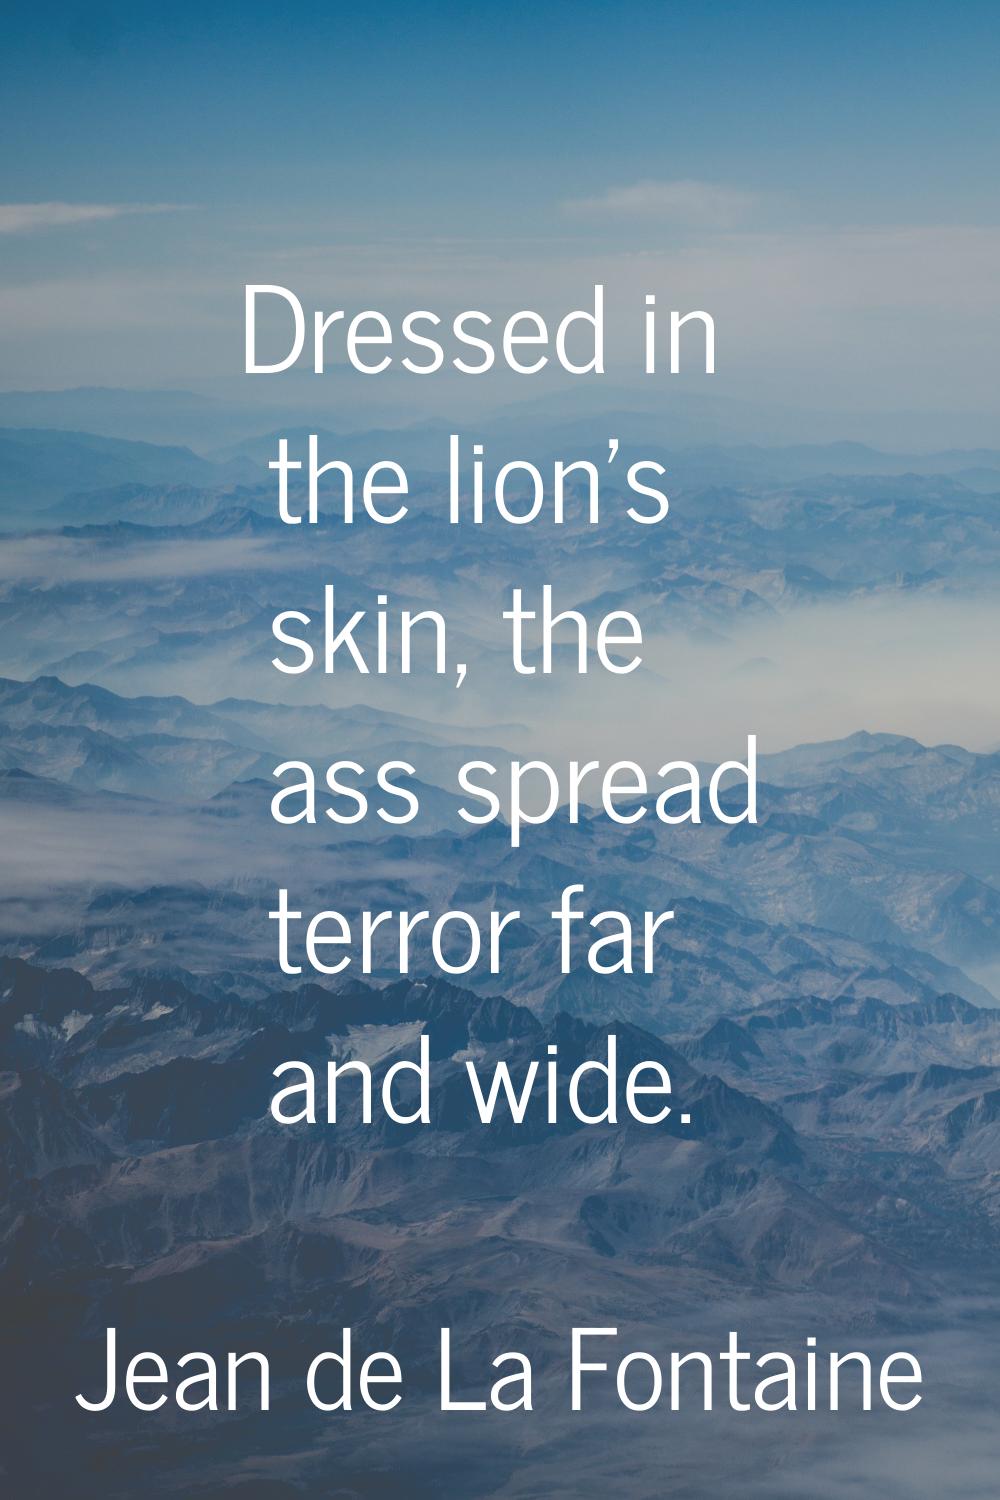 Dressed in the lion's skin, the ass spread terror far and wide.